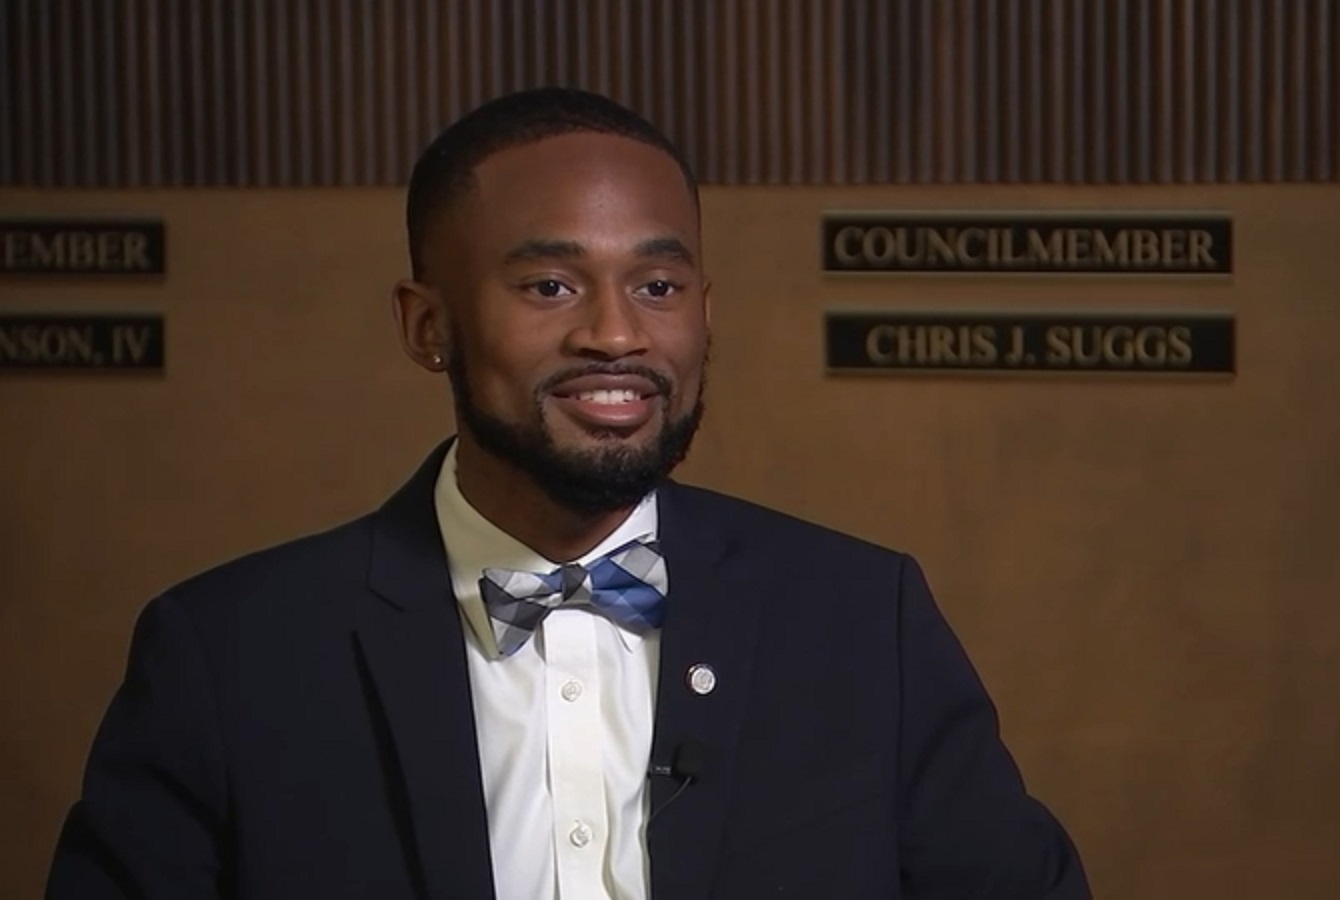 21-year-old UNC alum becomes youngest person in North Carolina serving in public office